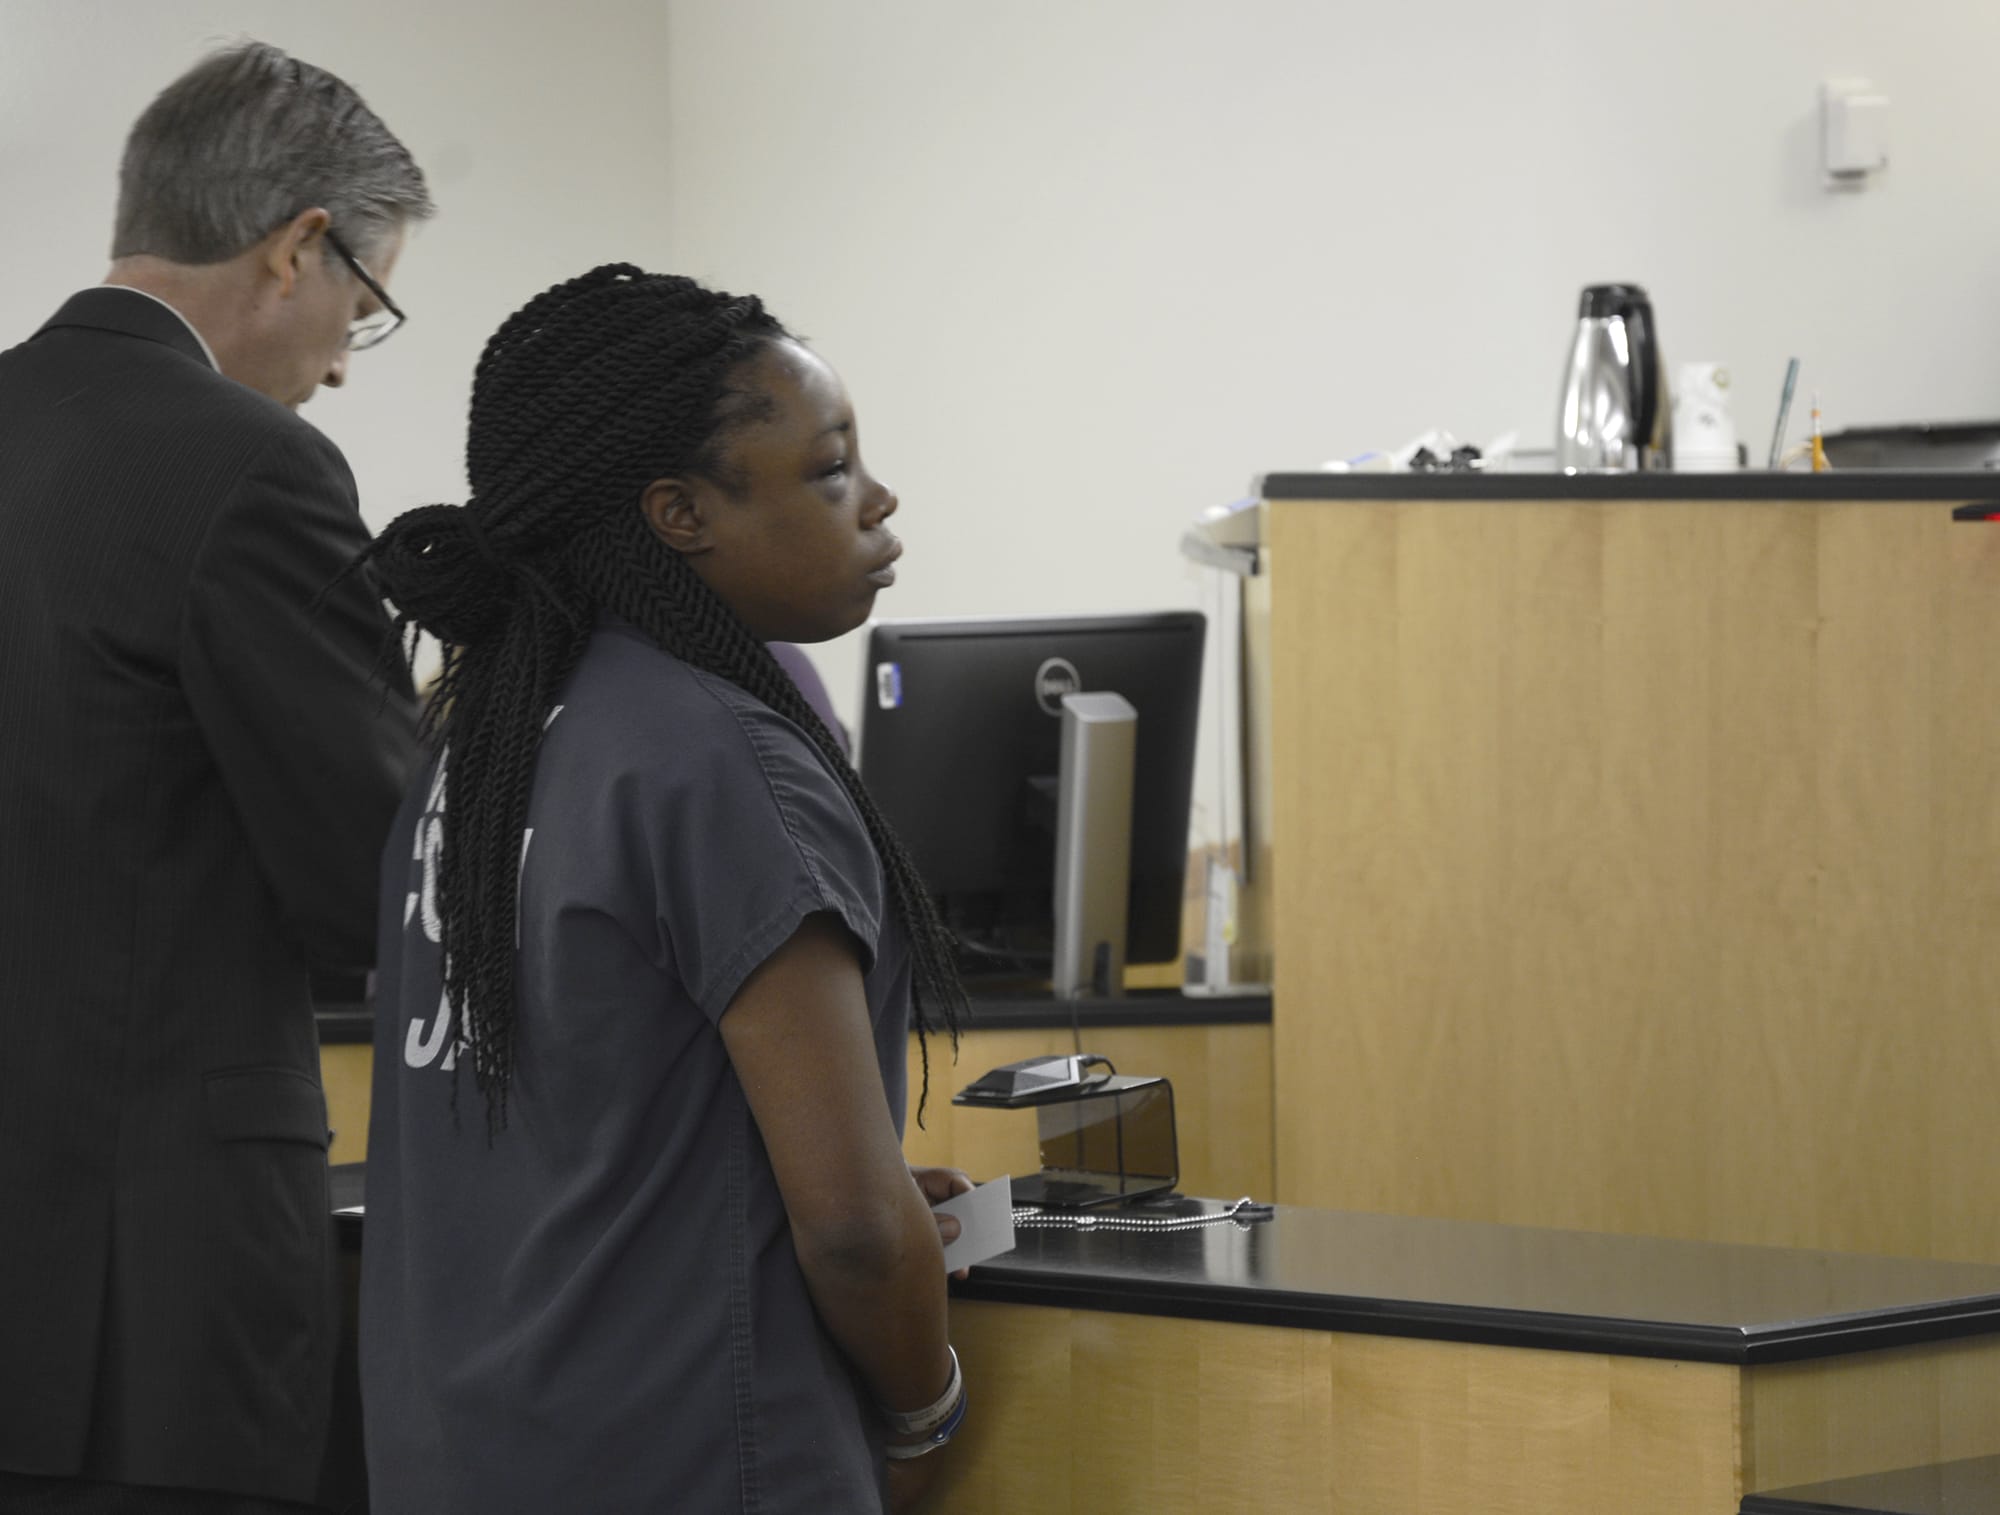 Fontella Hooper, 30, appeared in Clark County Suuperior Court Friday to face two charges of vehicular assault and driving with a suspended license.